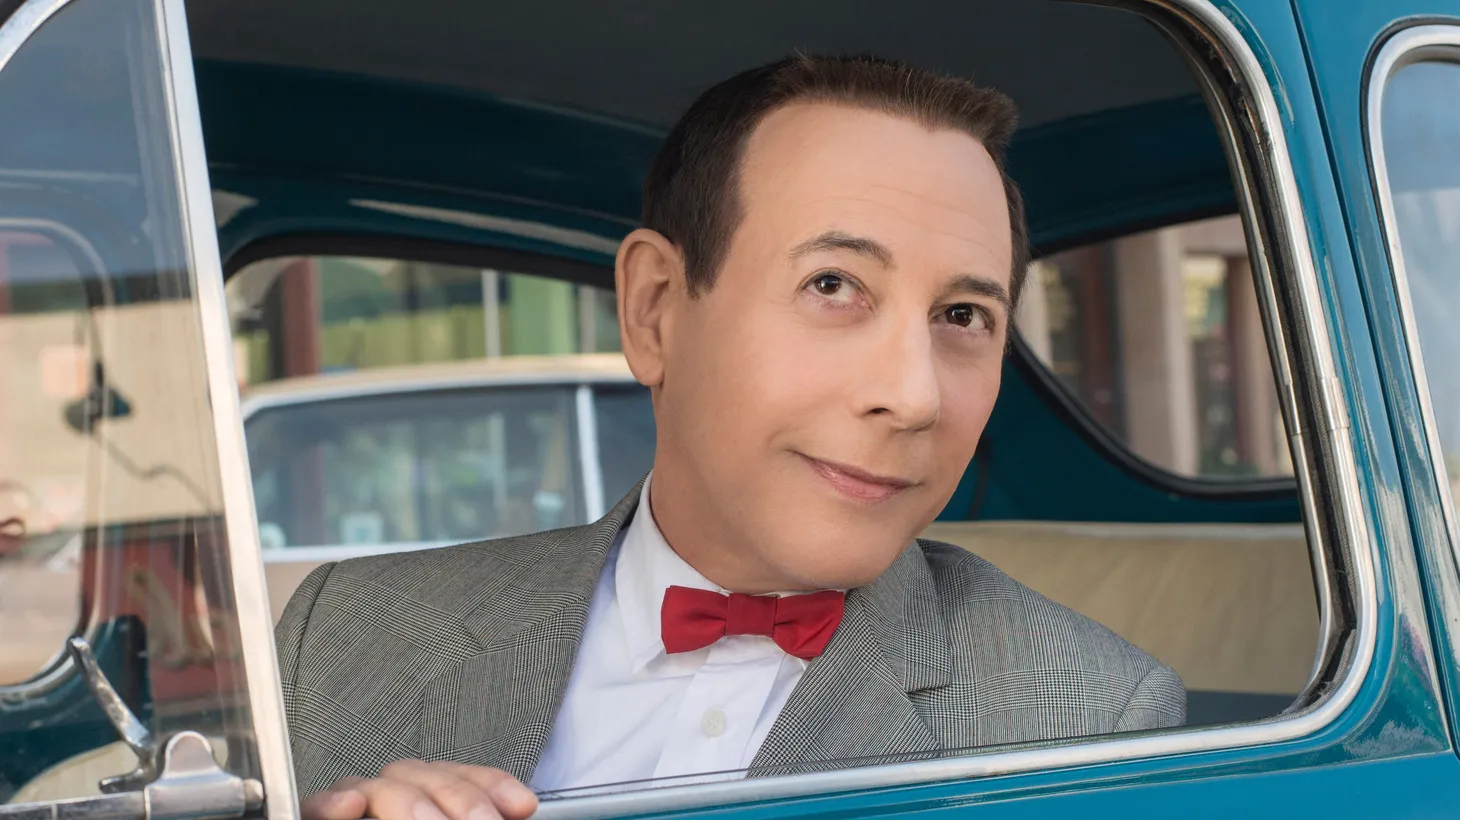 Pee-wee Herman returns to our TV screens with his first movie in 28 years. What songs inspire the iconic character? He gives us the scoop, with a playlist heavy on funk and soul.